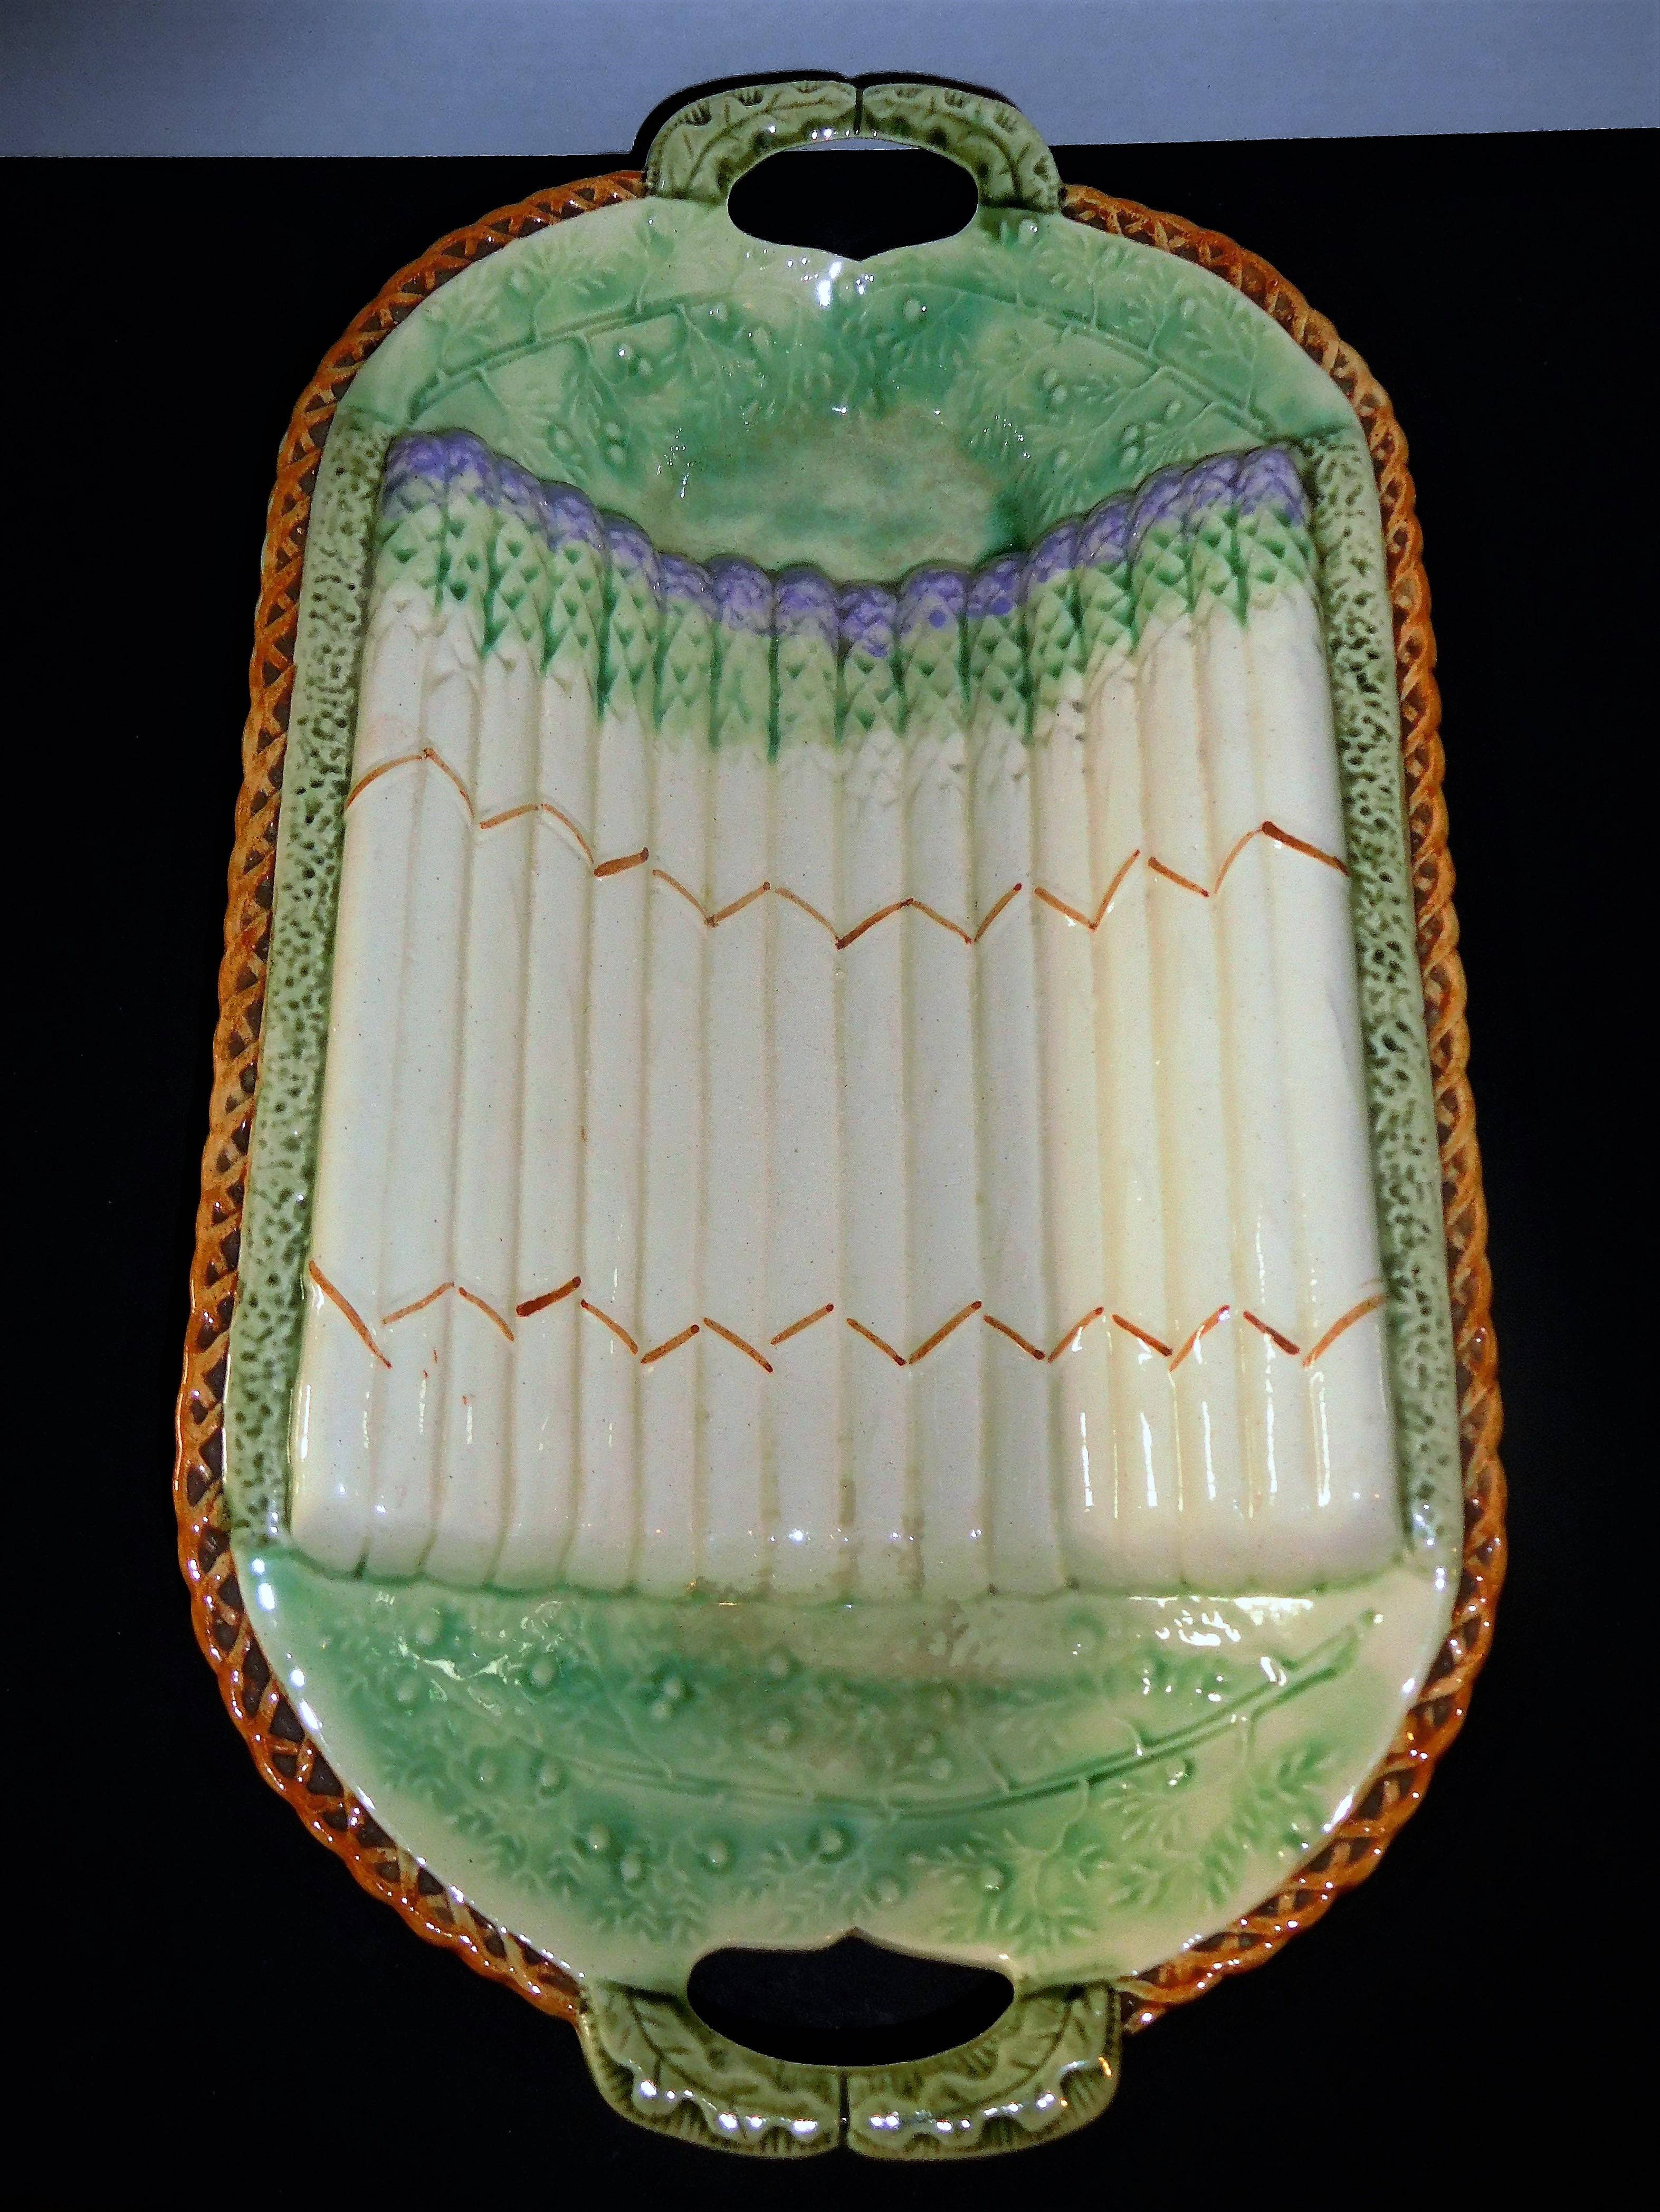 This majolica asparagus cradle resting atop an attached tray with pierced handles, has a brown basket-weave edge and four brown branches as feet. The interior of the basket is light green with bas-relief decoration of stylized asparagus stems, and